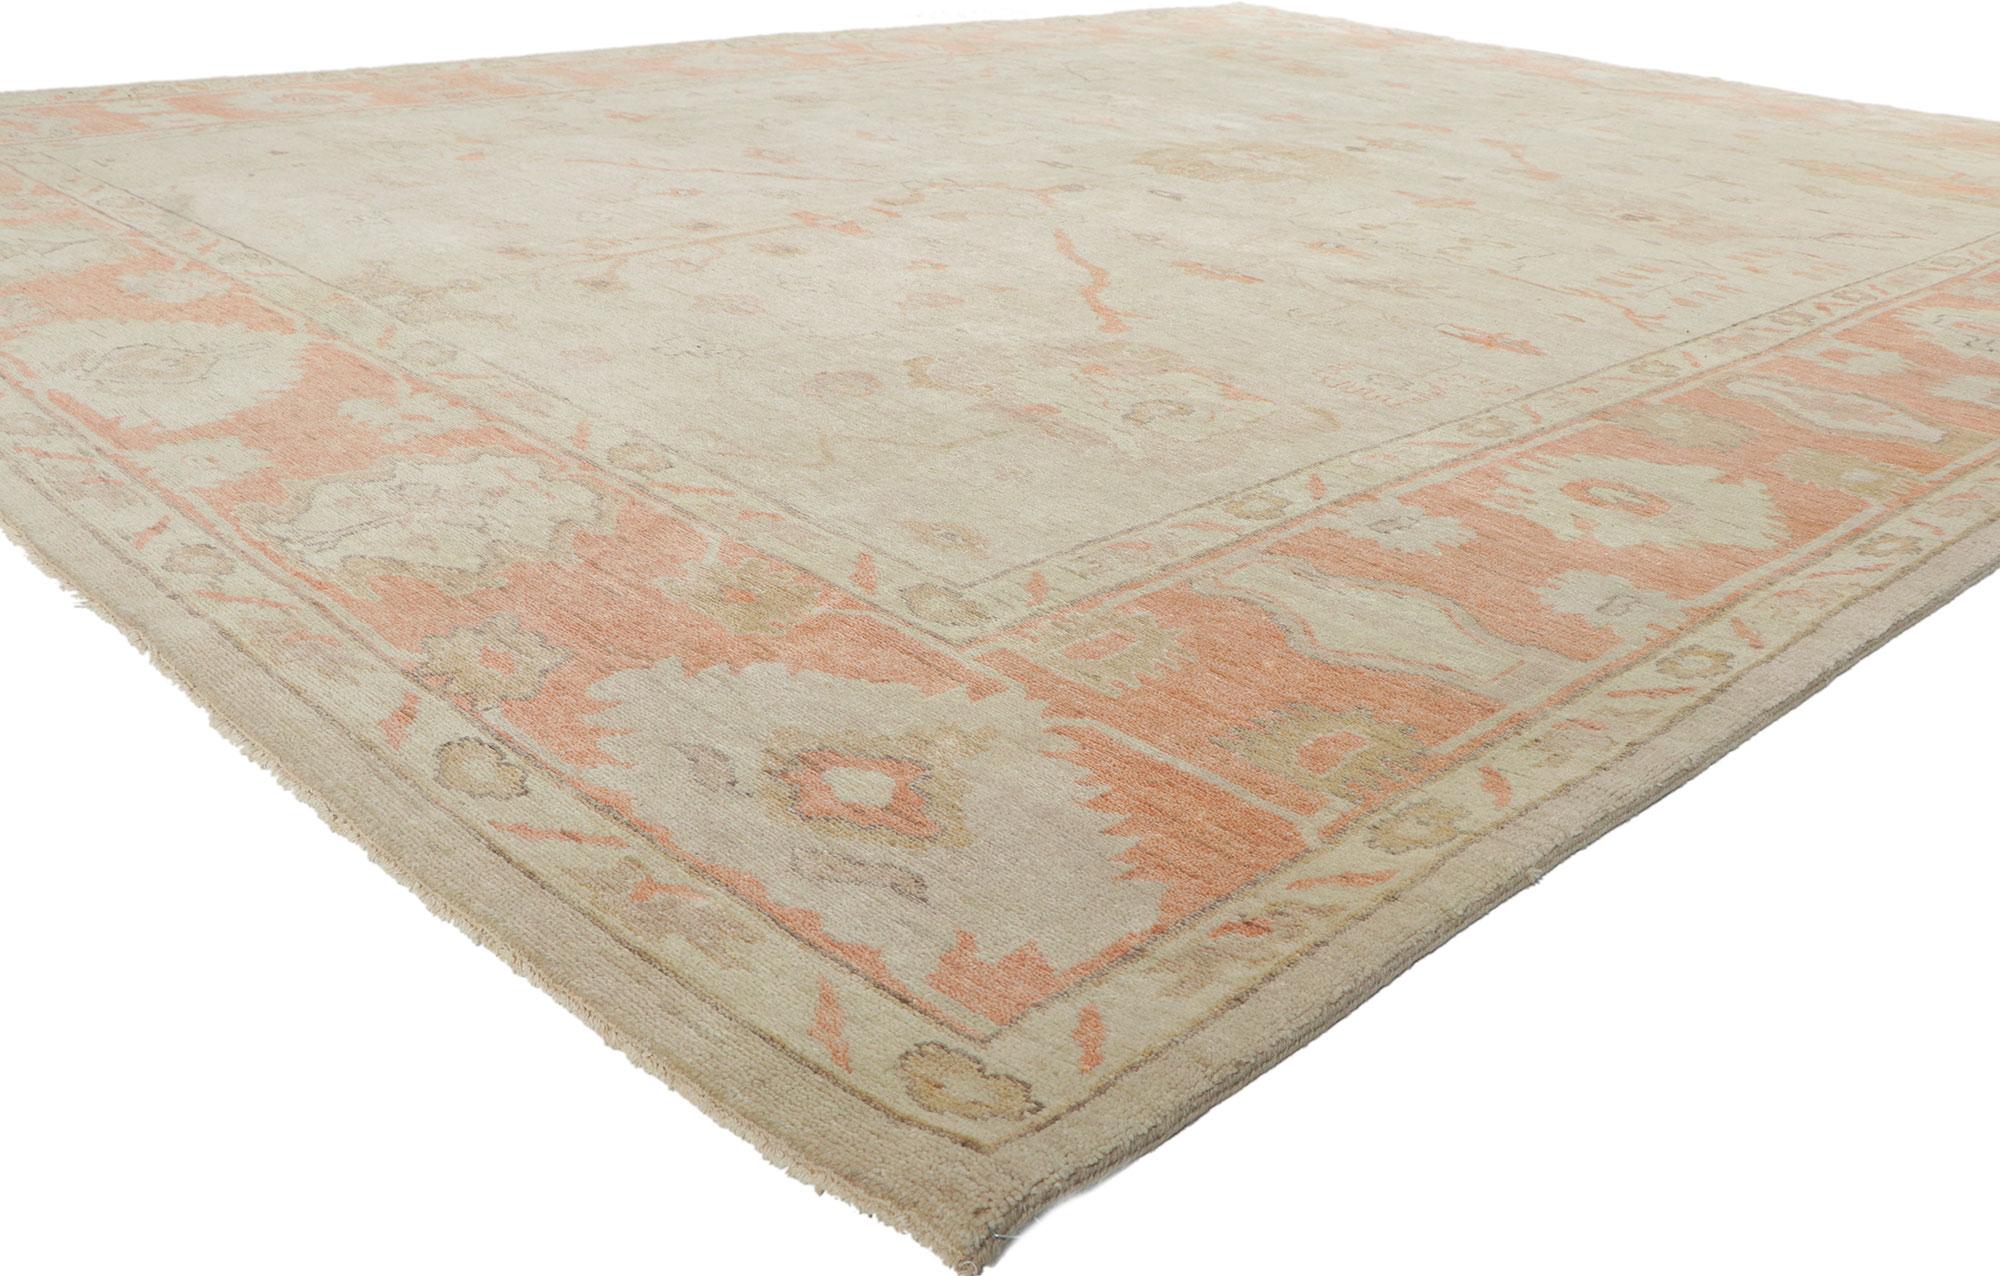 30108 New vintage-inspired Oushak rug, 10'04 x 13'07. With its timeless style, incredible detail and texture, this hand knotted wool vintage style Oushak rug is a captivating vision of woven beauty. The transitional design and soft colorway woven